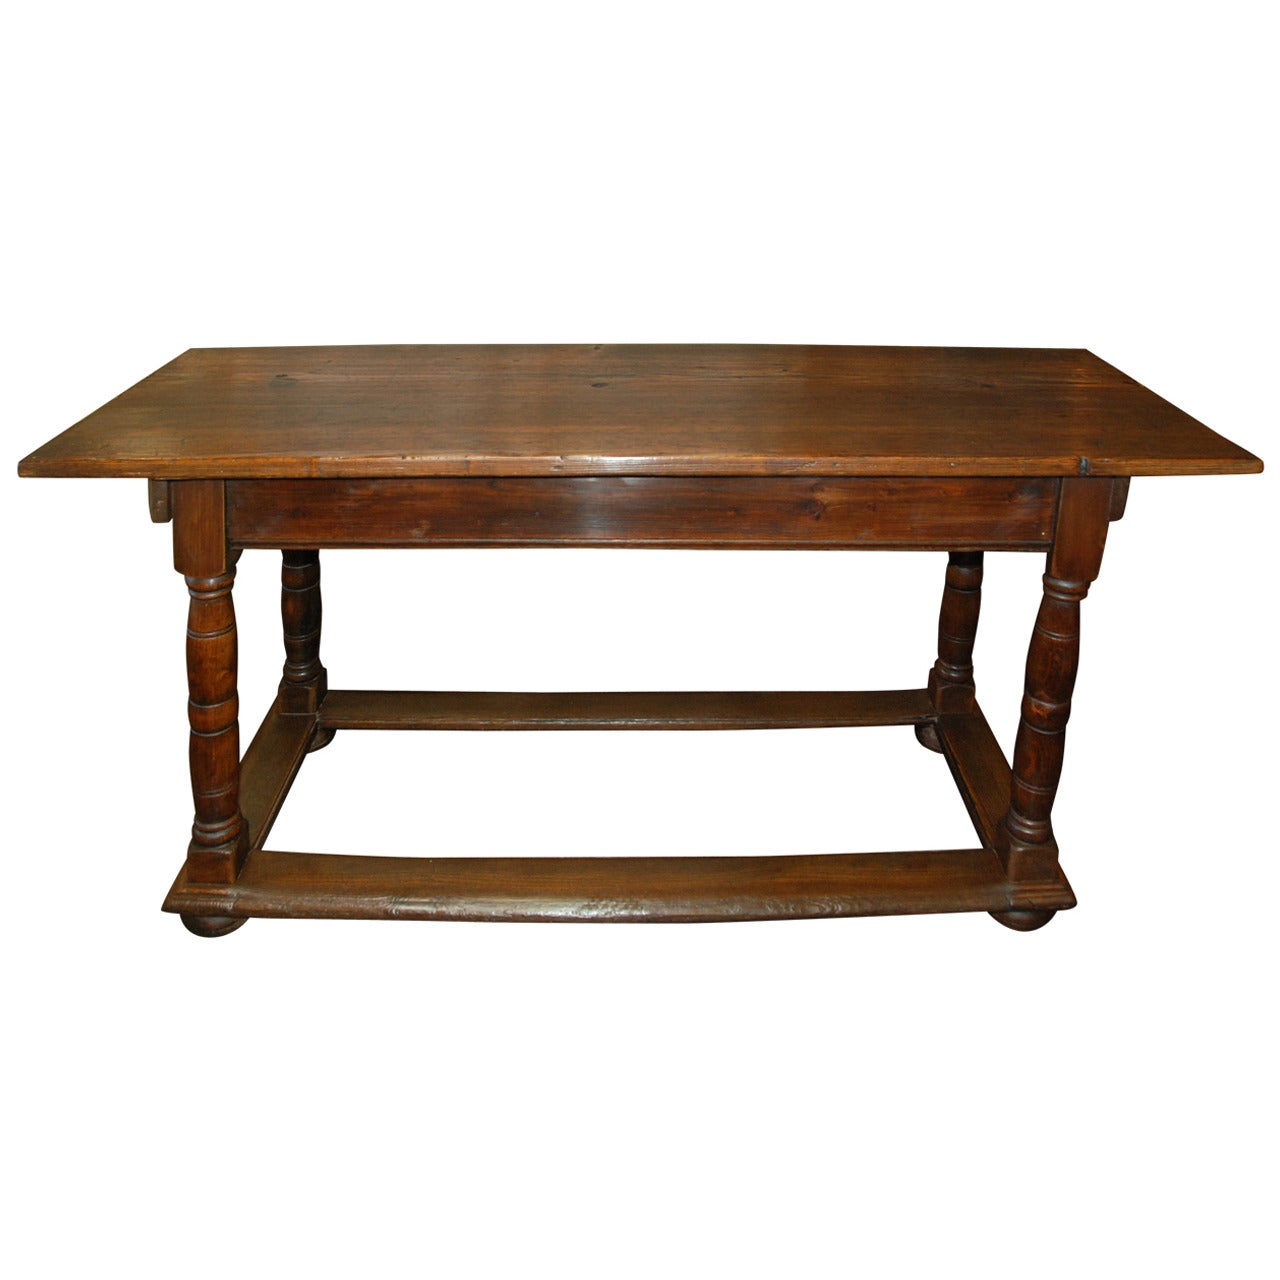 French Walnut Refectory Table 19th c.